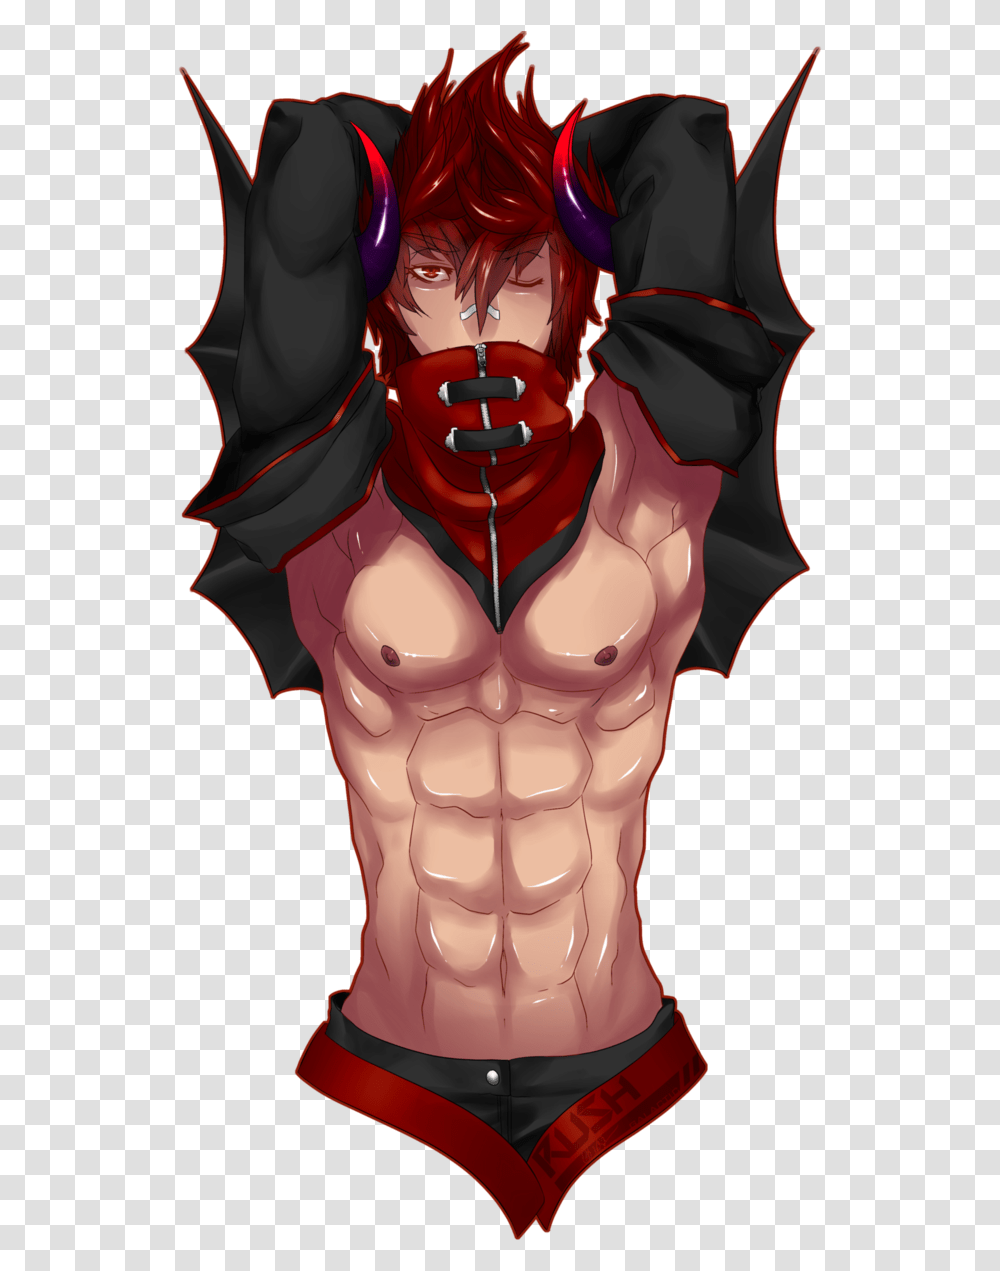 Buff 2 By Galactic Rush Anime Guy With Abs, Torso, Cape, Apparel Transparent Png